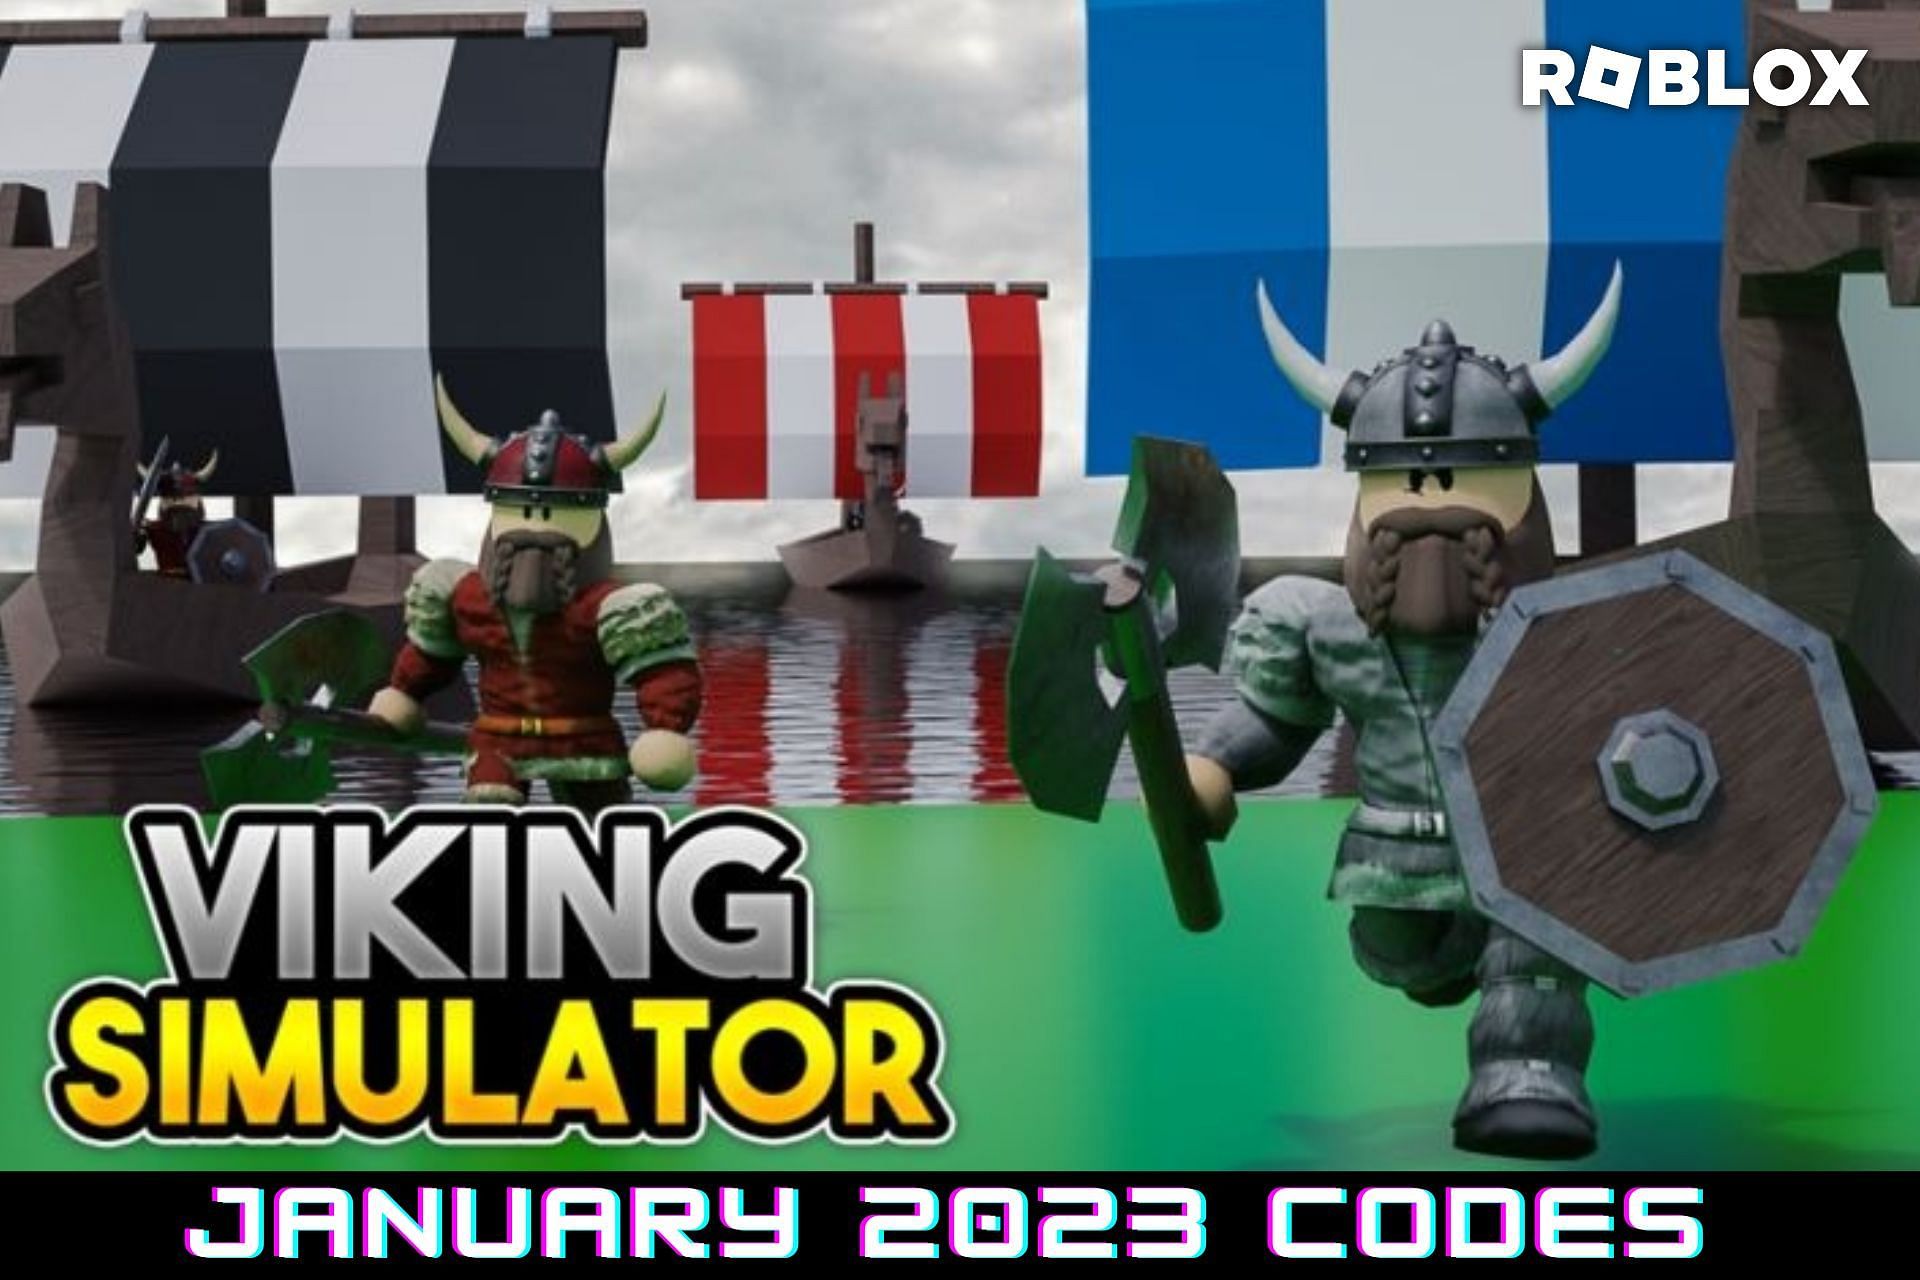 roblox-viking-simulator-codes-for-january-2023-free-coins-and-pets